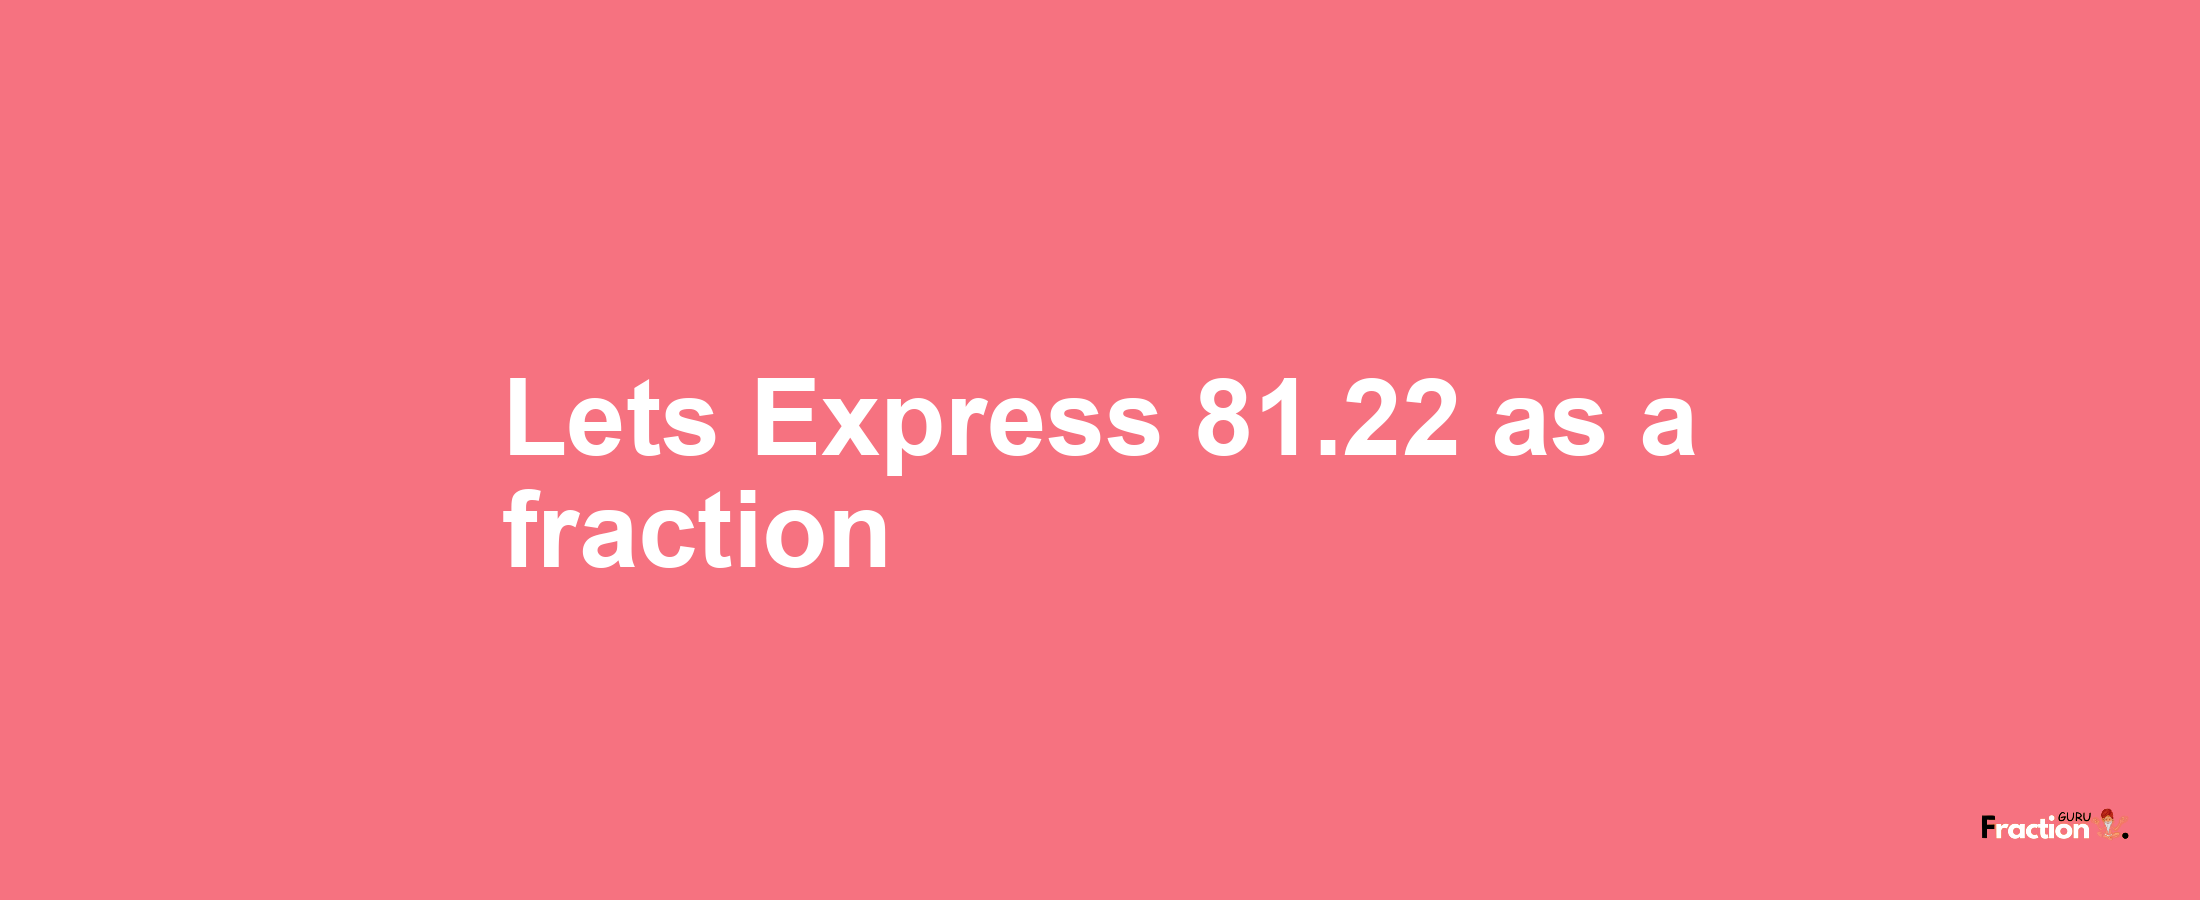 Lets Express 81.22 as afraction